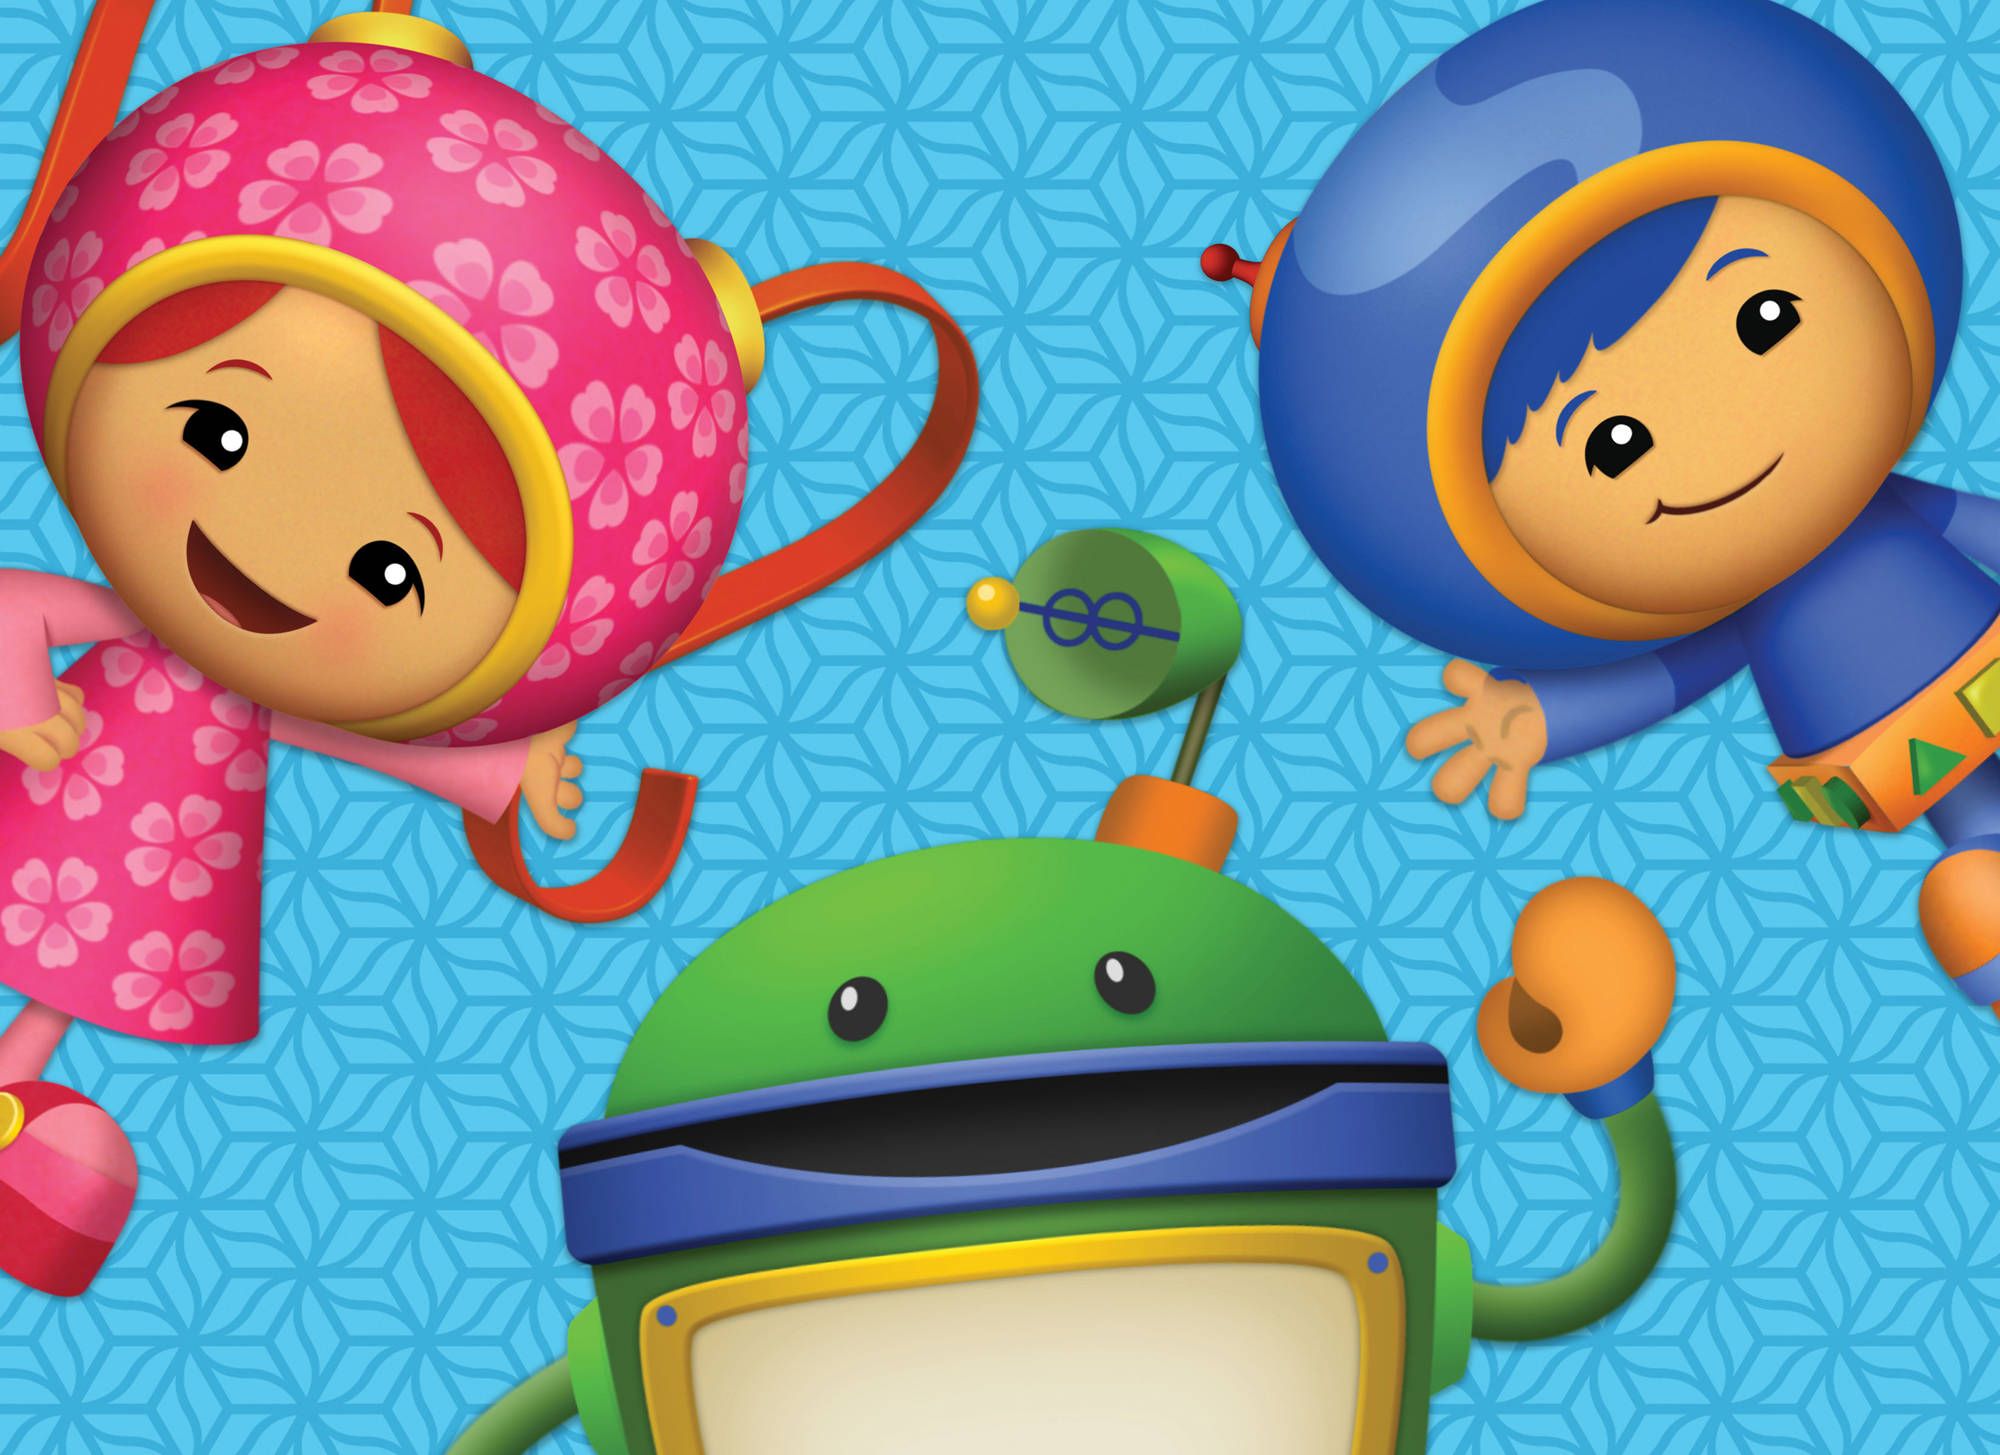 team umizoomi wallpapers high quality download free on team umizoomi wallpapers